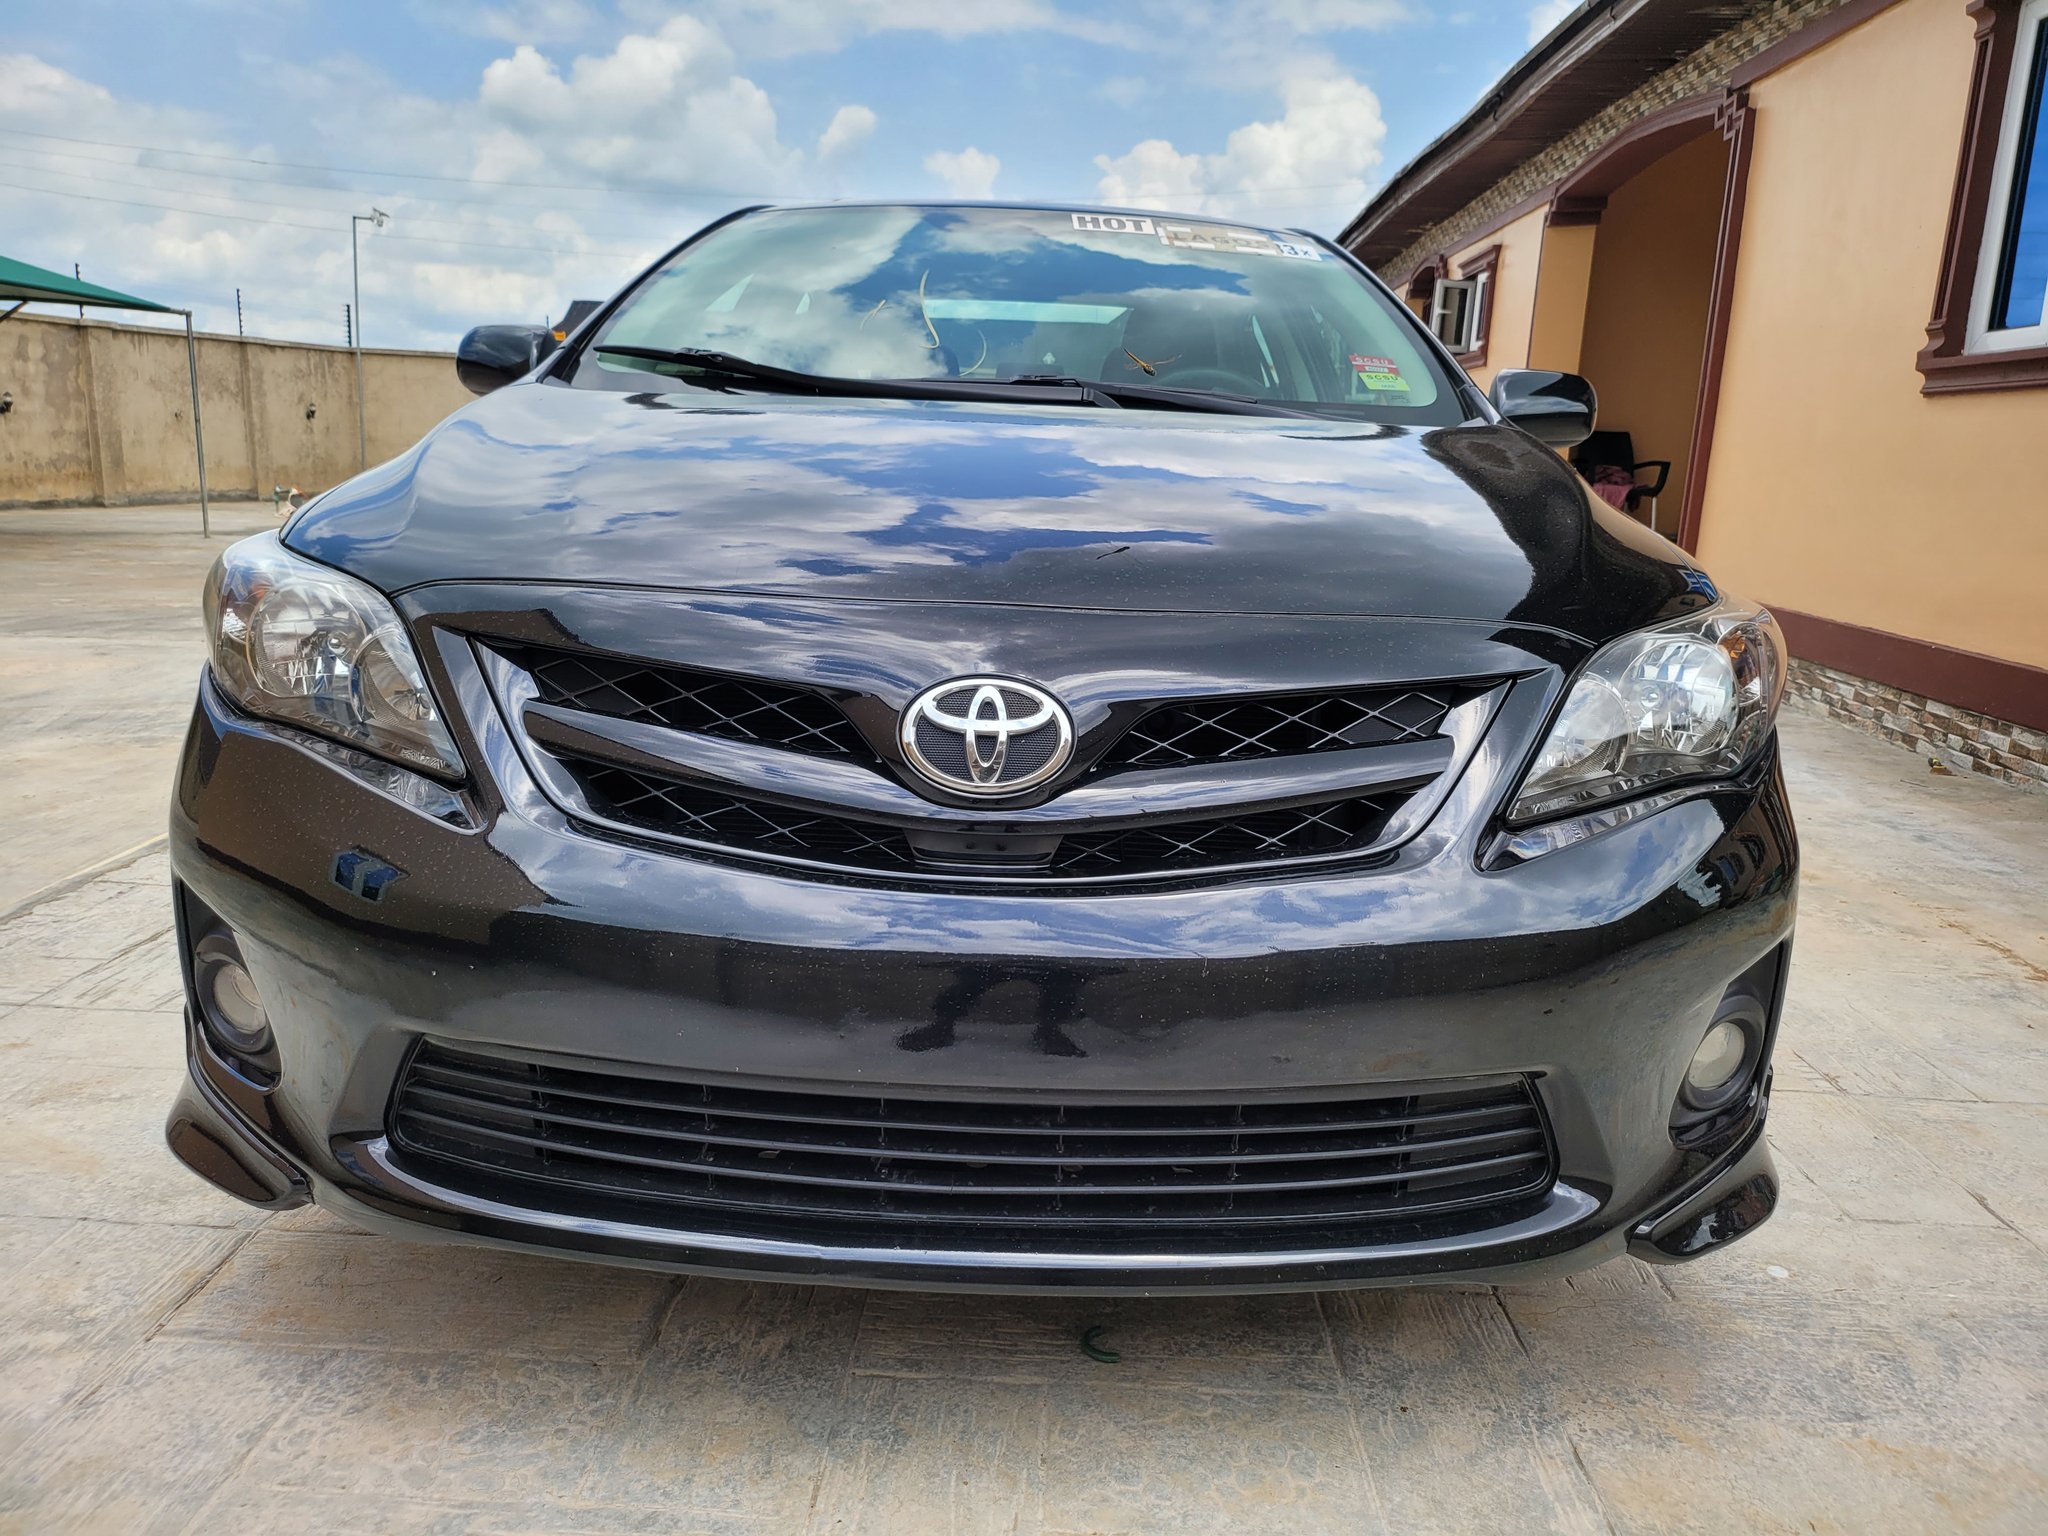 Man Cries Out For Help Over Failure To Retrieve Stolen Vehicle From SCID Man Cries Out For Help Over Failure To Retrieve Stolen Vehicle From SCID